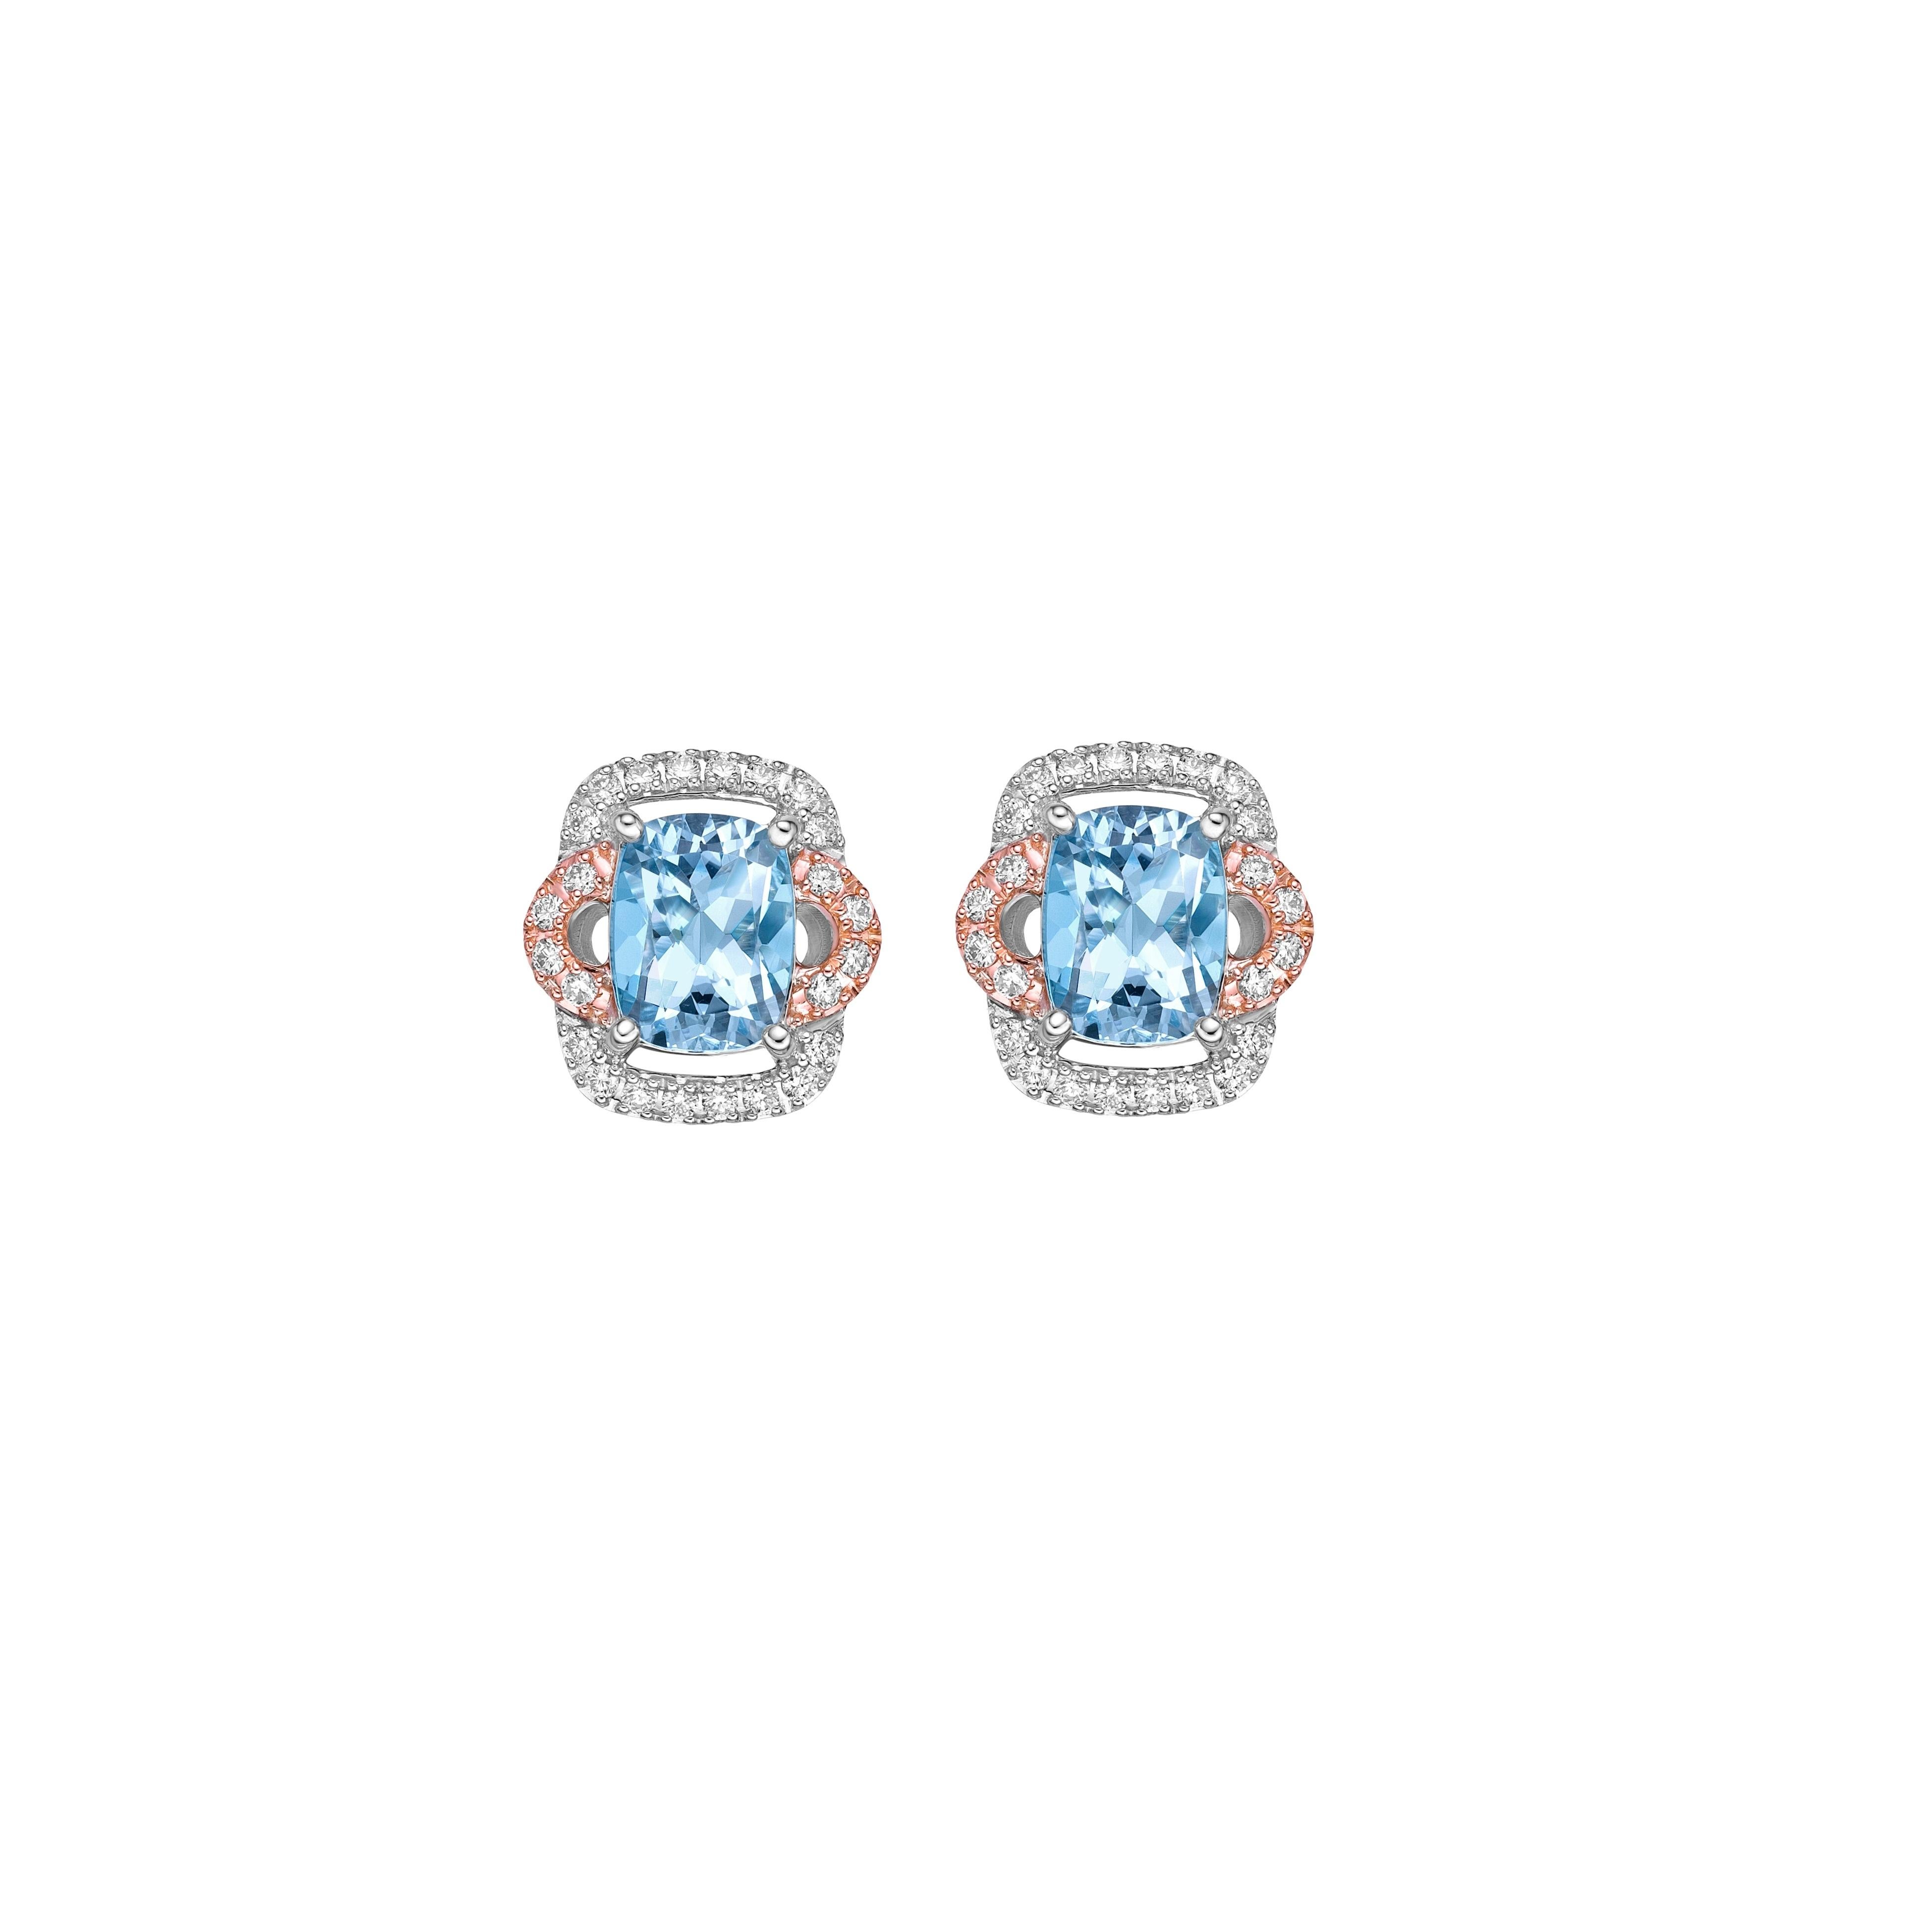 Contemporary 2.66 Carat Aquamarine Stud Earring in 18Karat White Rose Gold with Diamond. For Sale